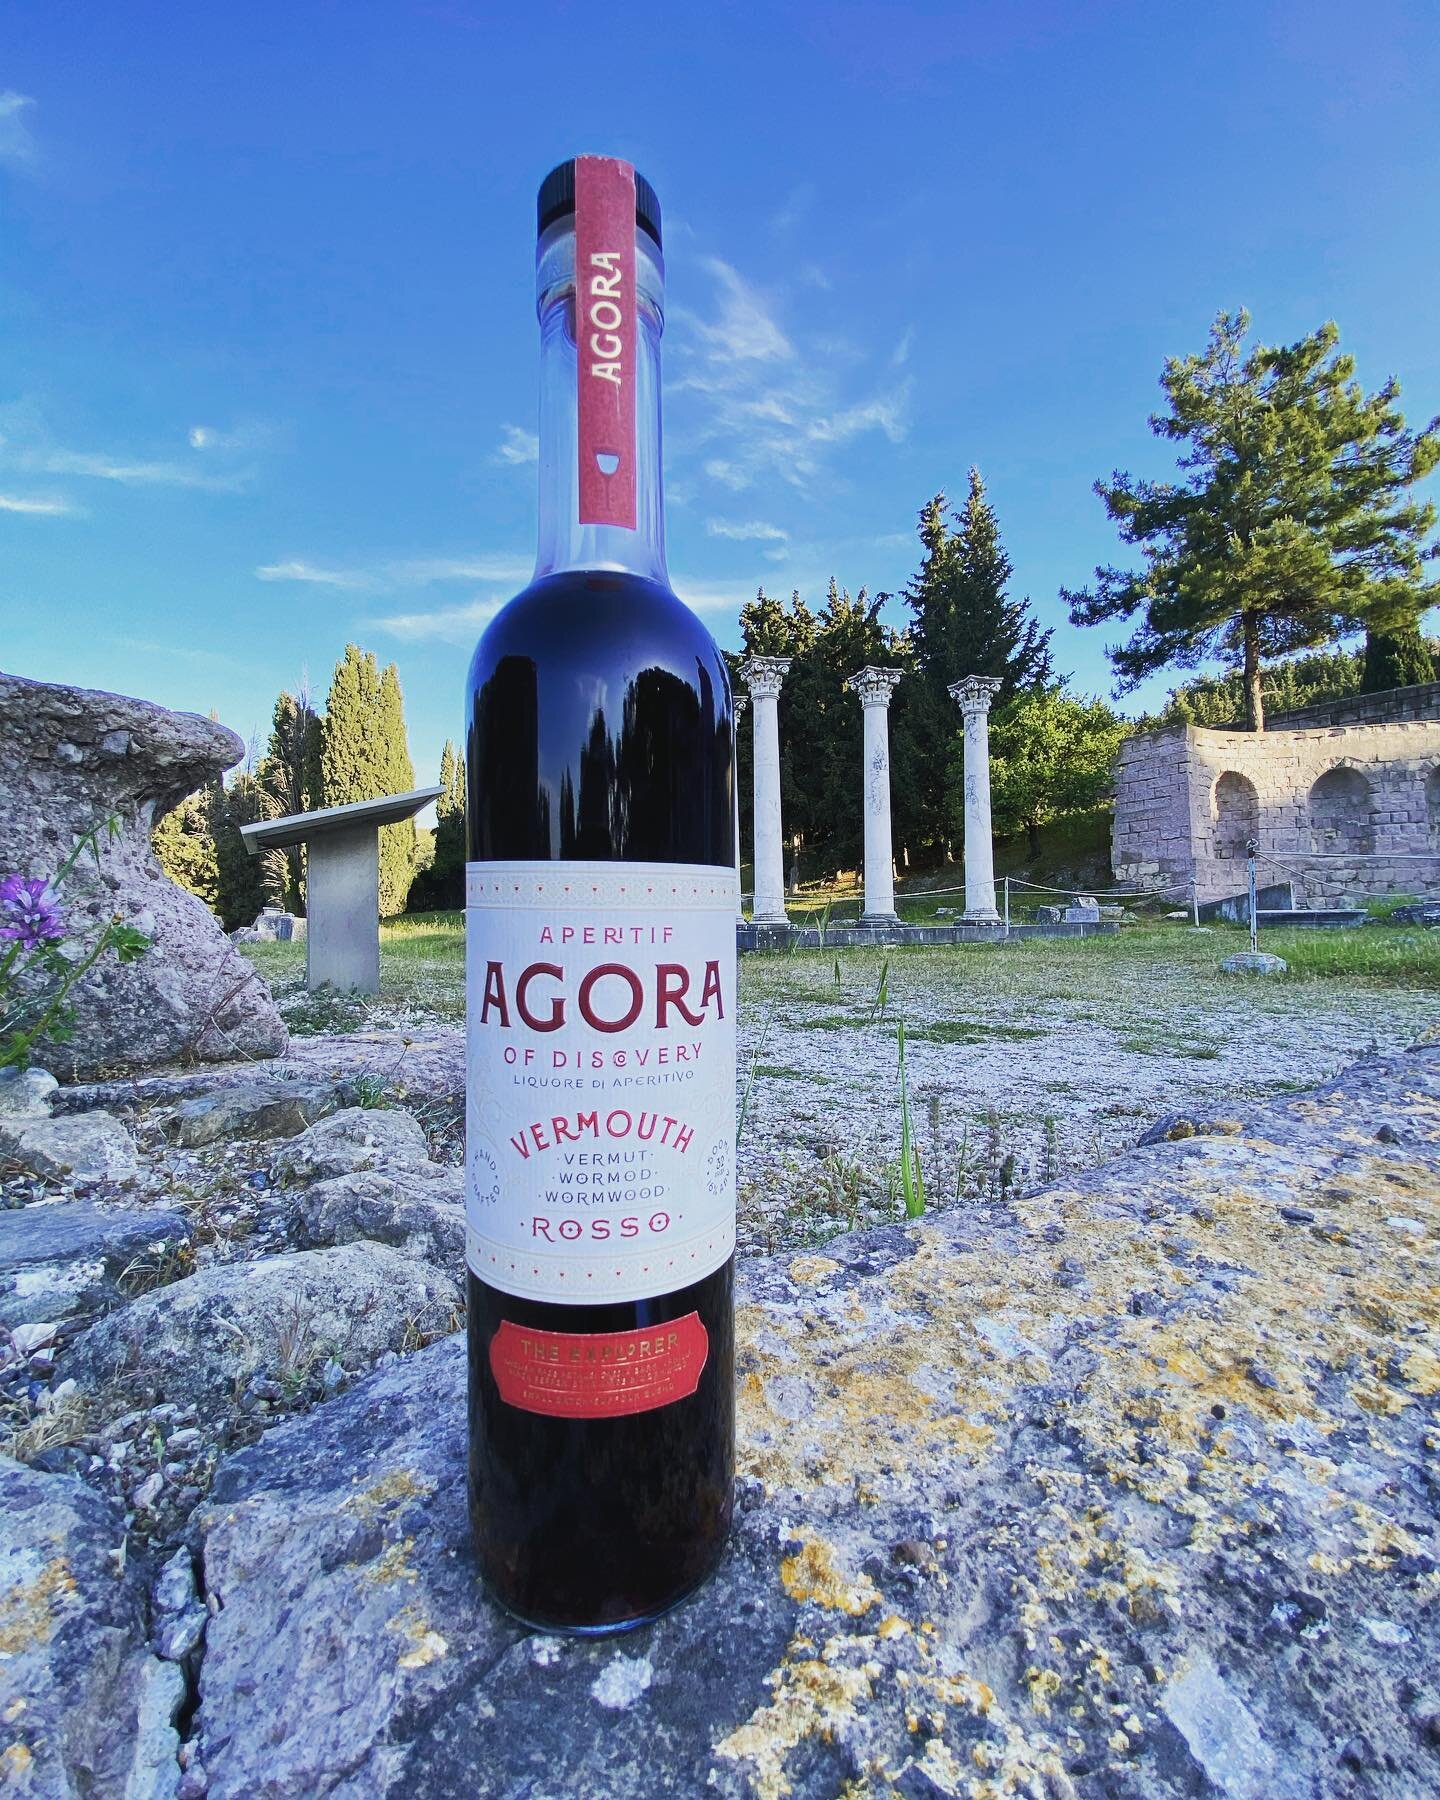 It is believed that the birthplace of vermouth was on the island of Kos. Hippocrates made wormwood/herb like tonics cut with wine for medicinal purposes at the Asklepion of Kos. 

A spiritual journey for Agora Vermouth. 

#agoravermouth #vermouth #ve